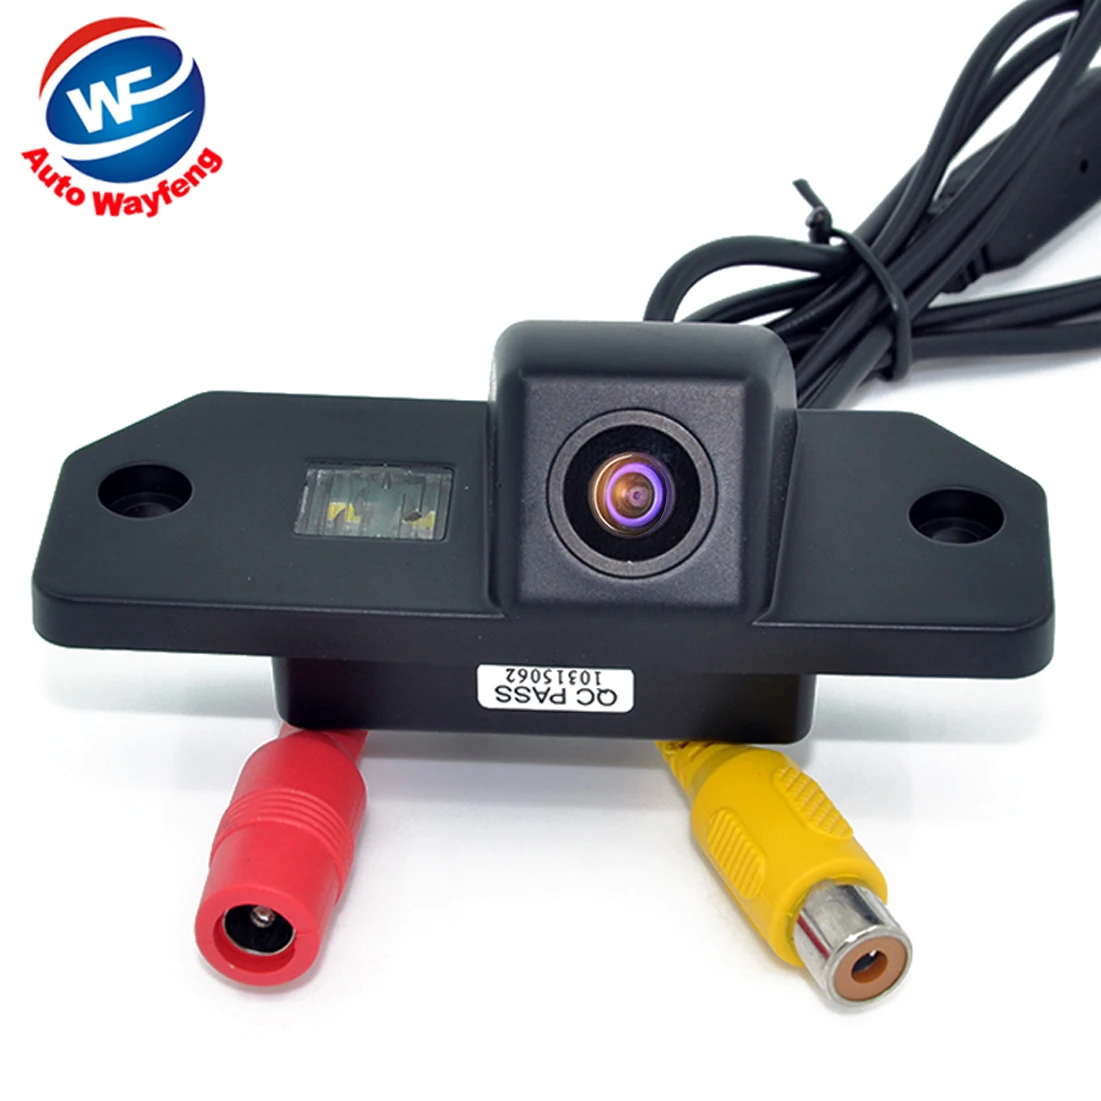 

ccd CCD Car Rear View Camera Reverse backup Camera rearview parking for ford focus (3C) Mondeo (2000-2007) C-Max (2007-2009)